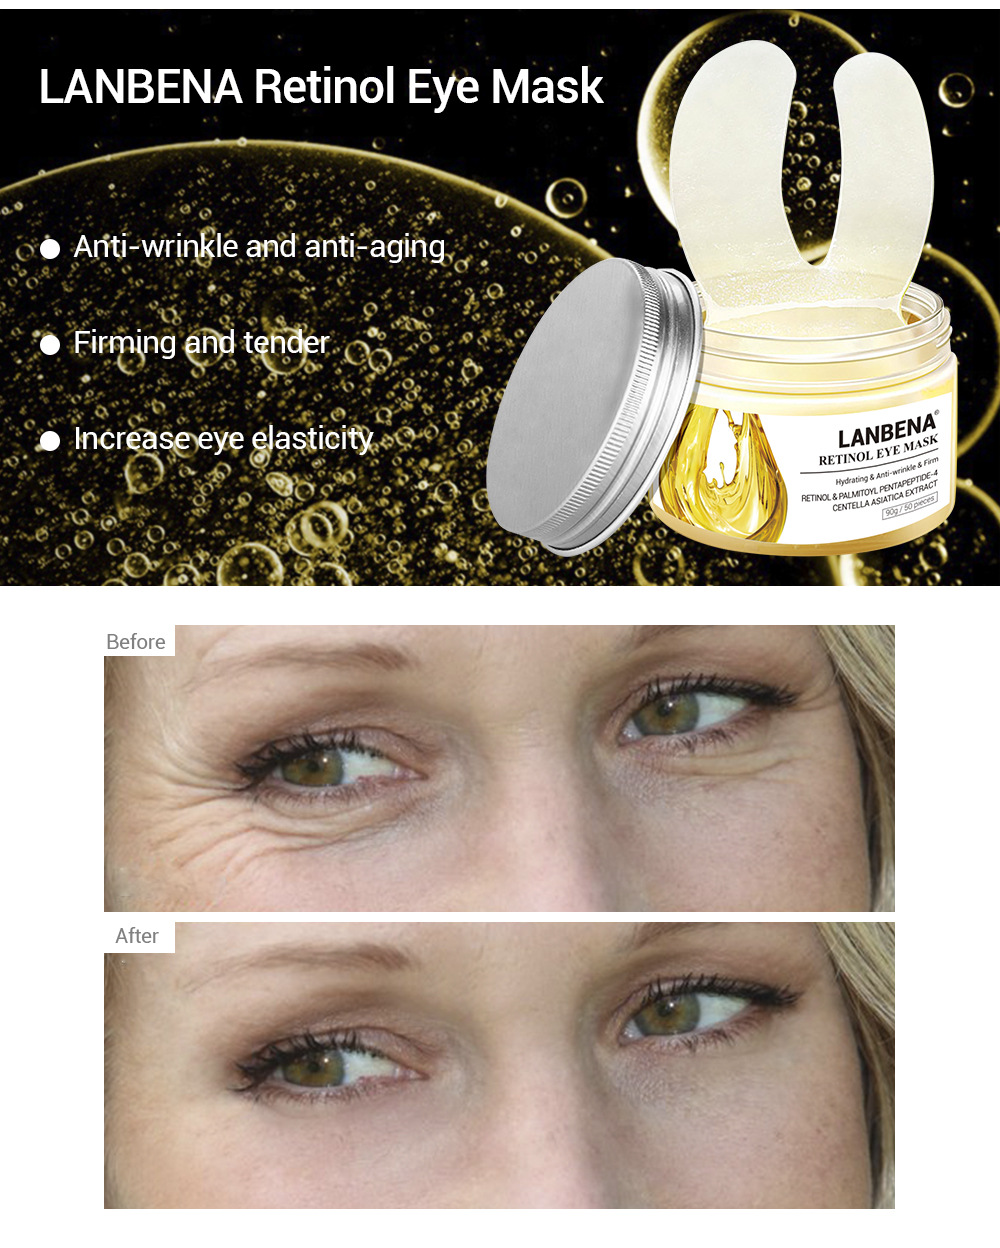 Functional-Eye-Mask-Soothes-Wrinkles-Removes-Edema-Anti-Aging-Lifts-Tightens-Eye-Mask-1537425-3